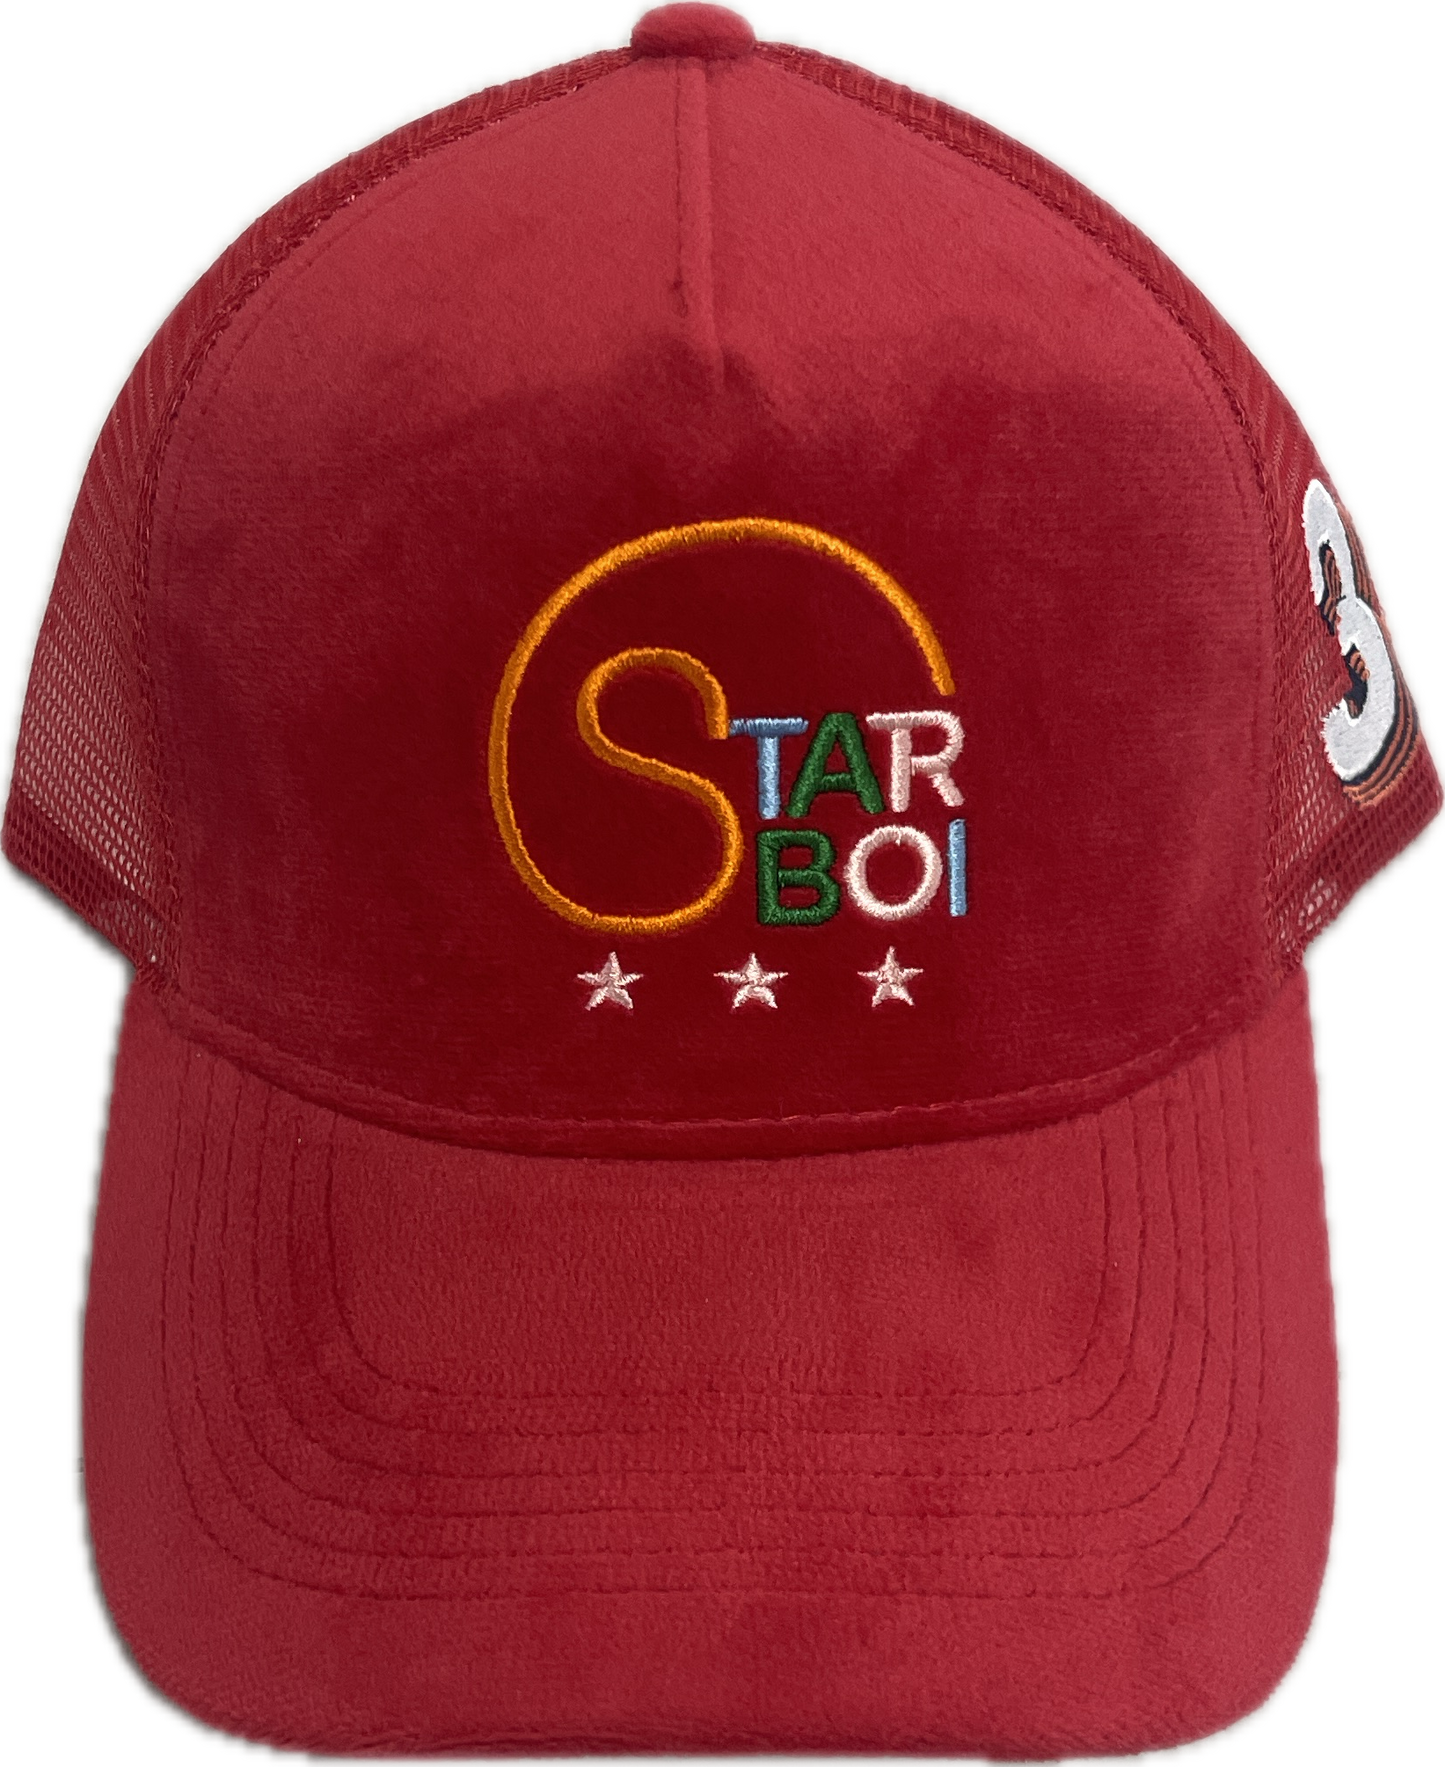 Starboi Hat Red